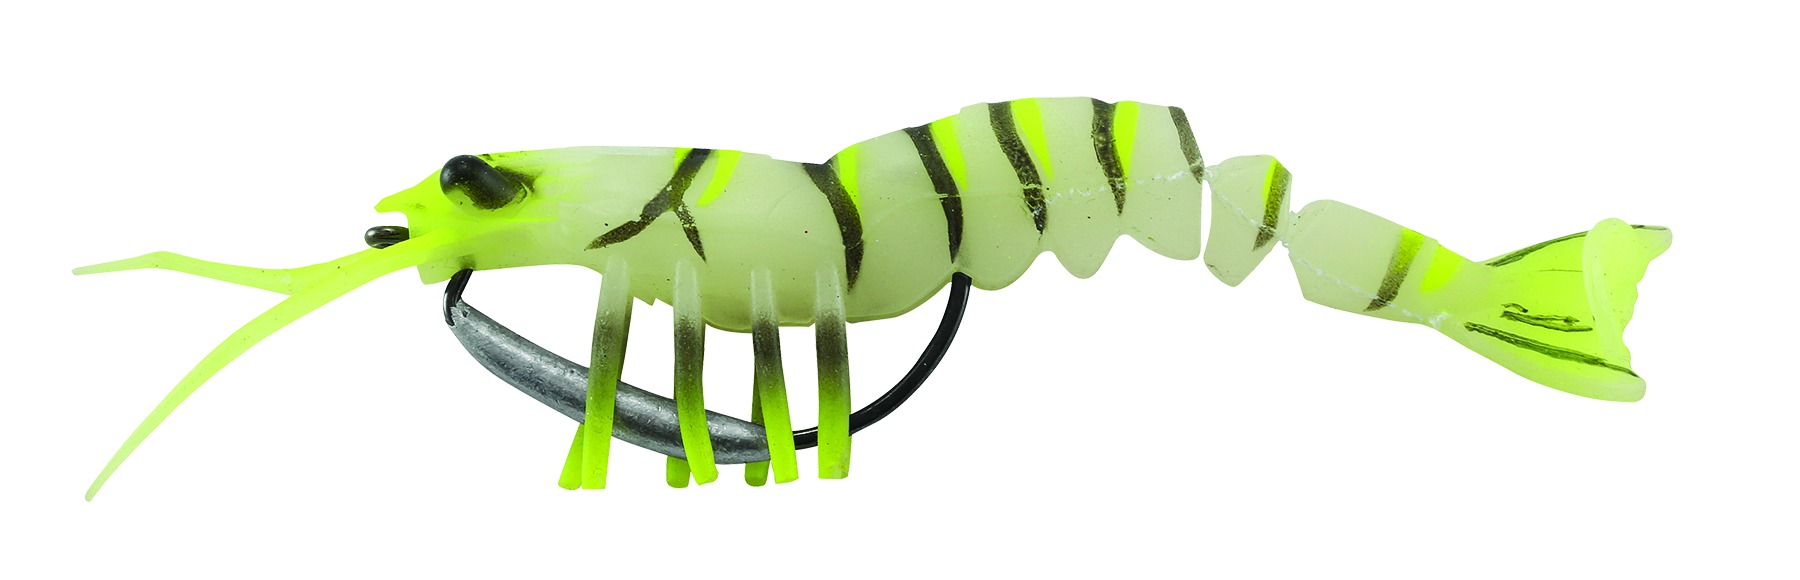 Savage gearCheck out today's featured product: tpe 3w shrimp